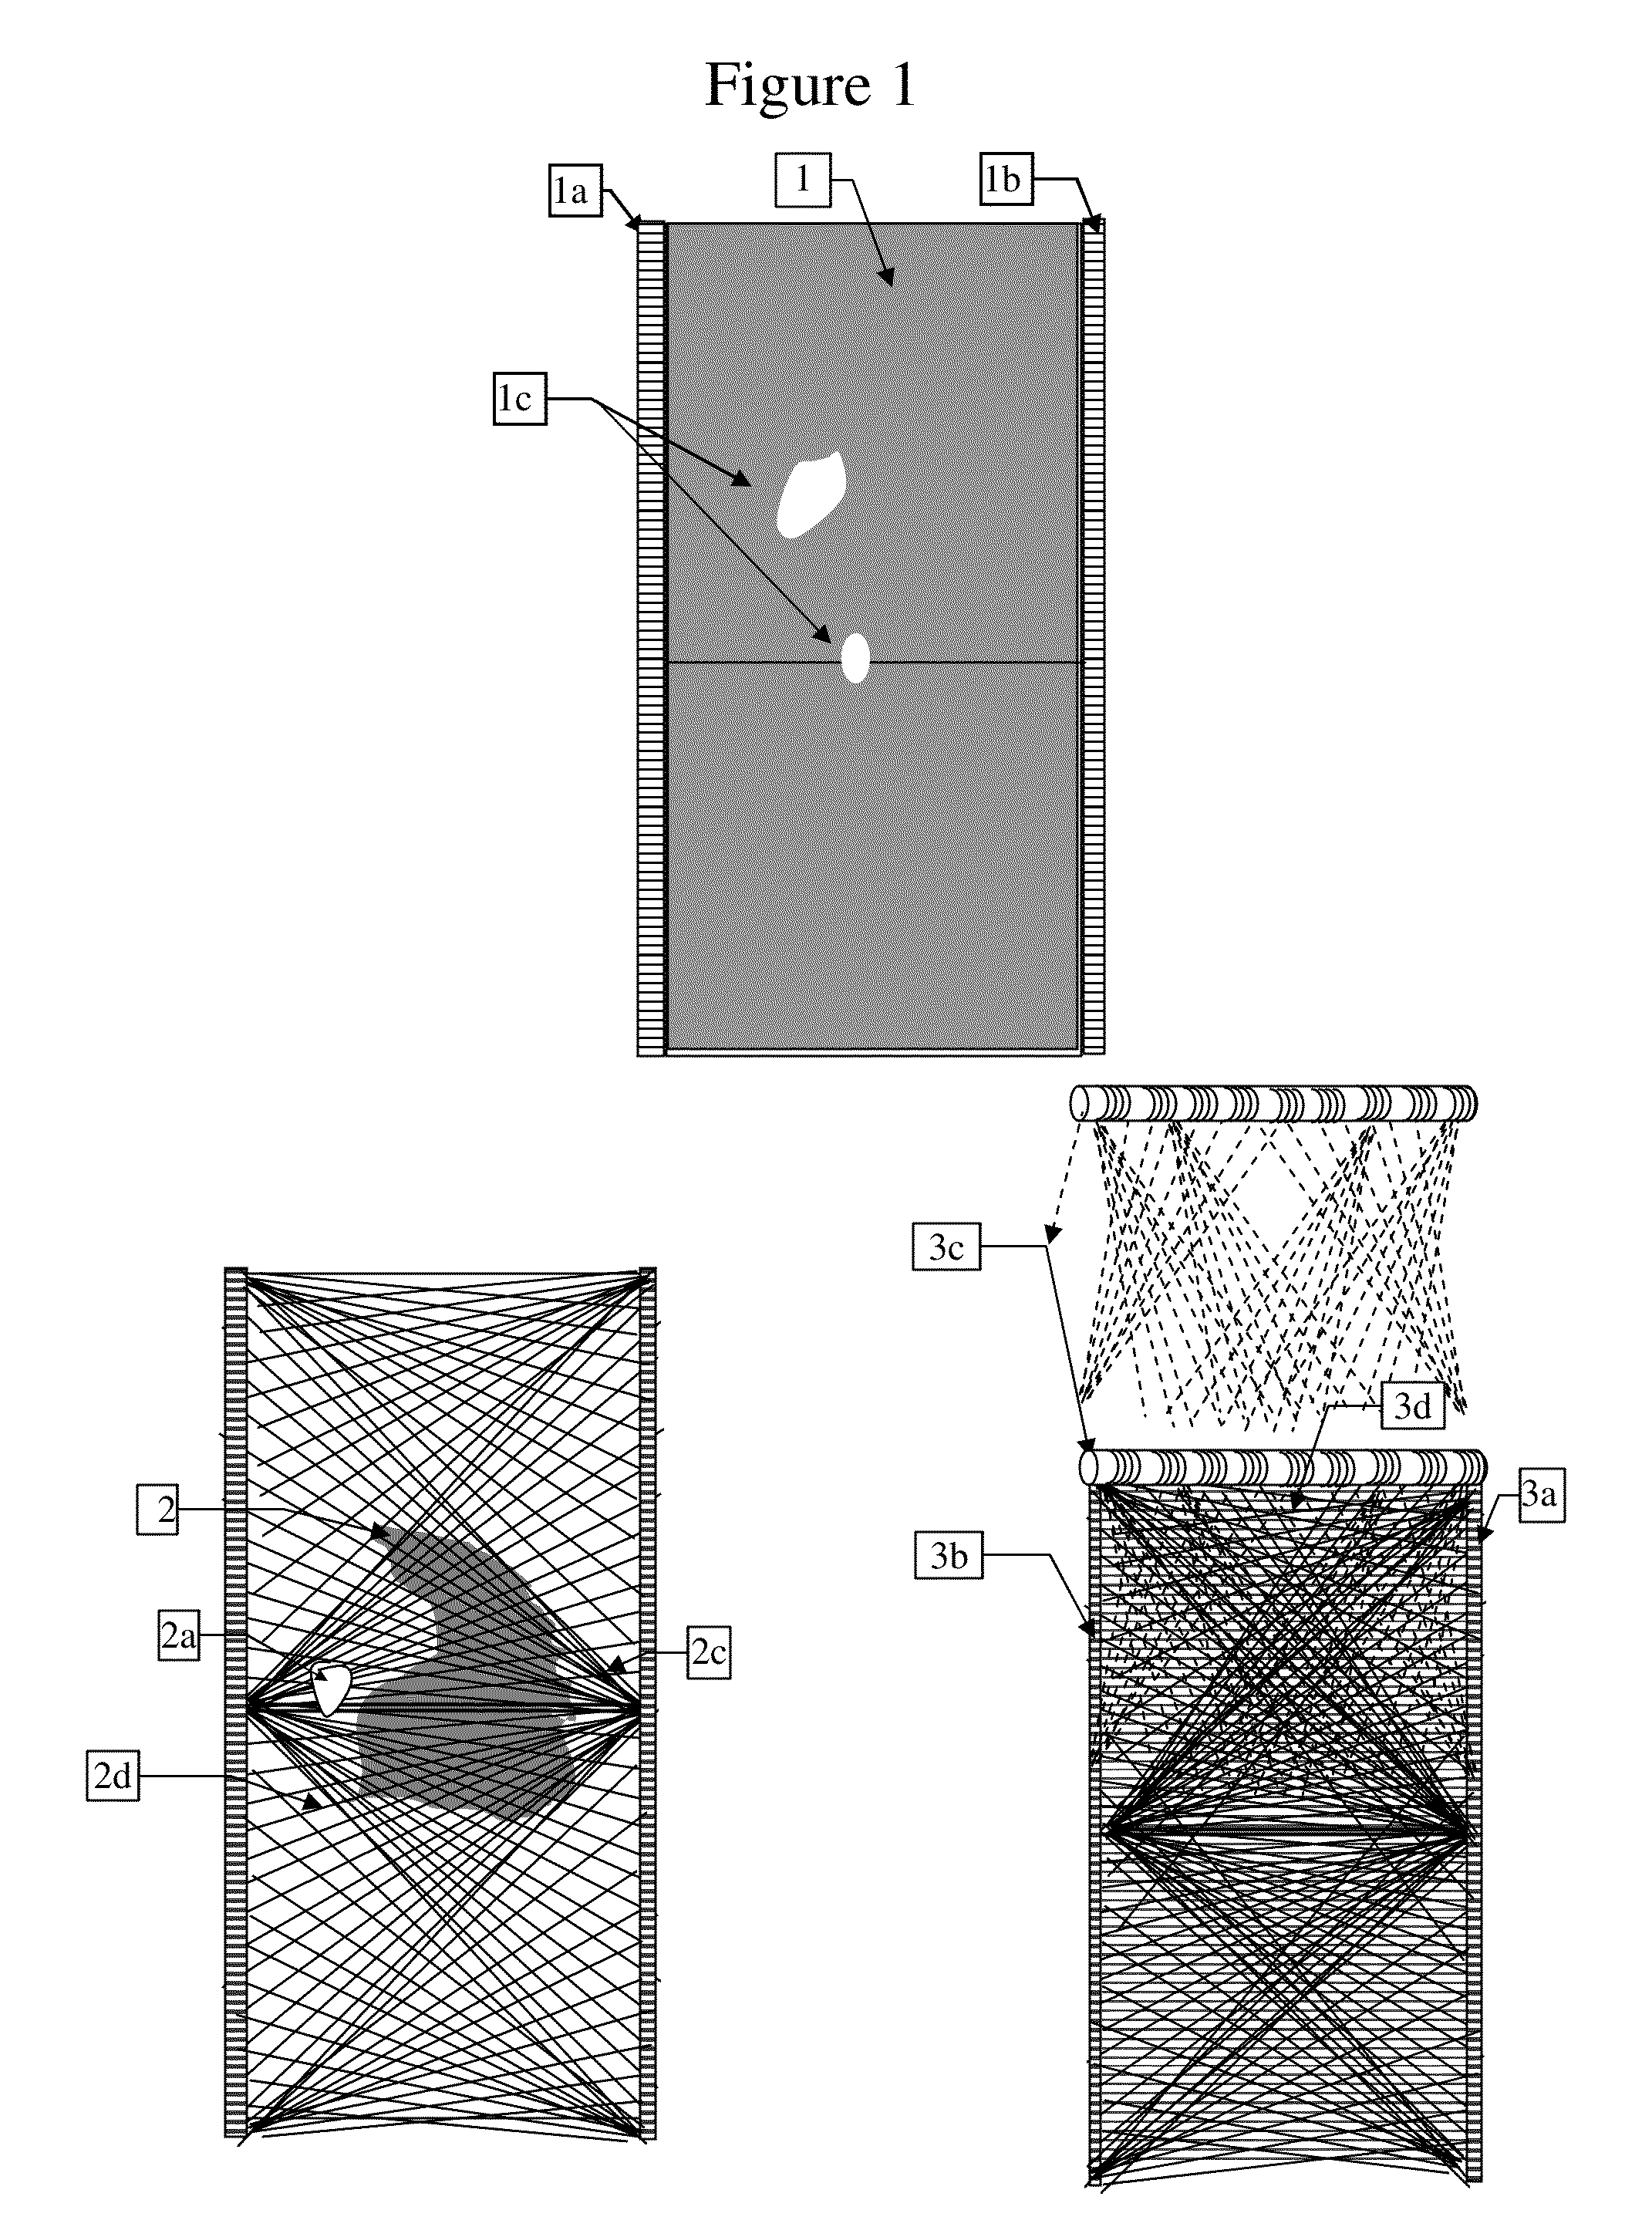 Method and apparatus for mapping the underground soil